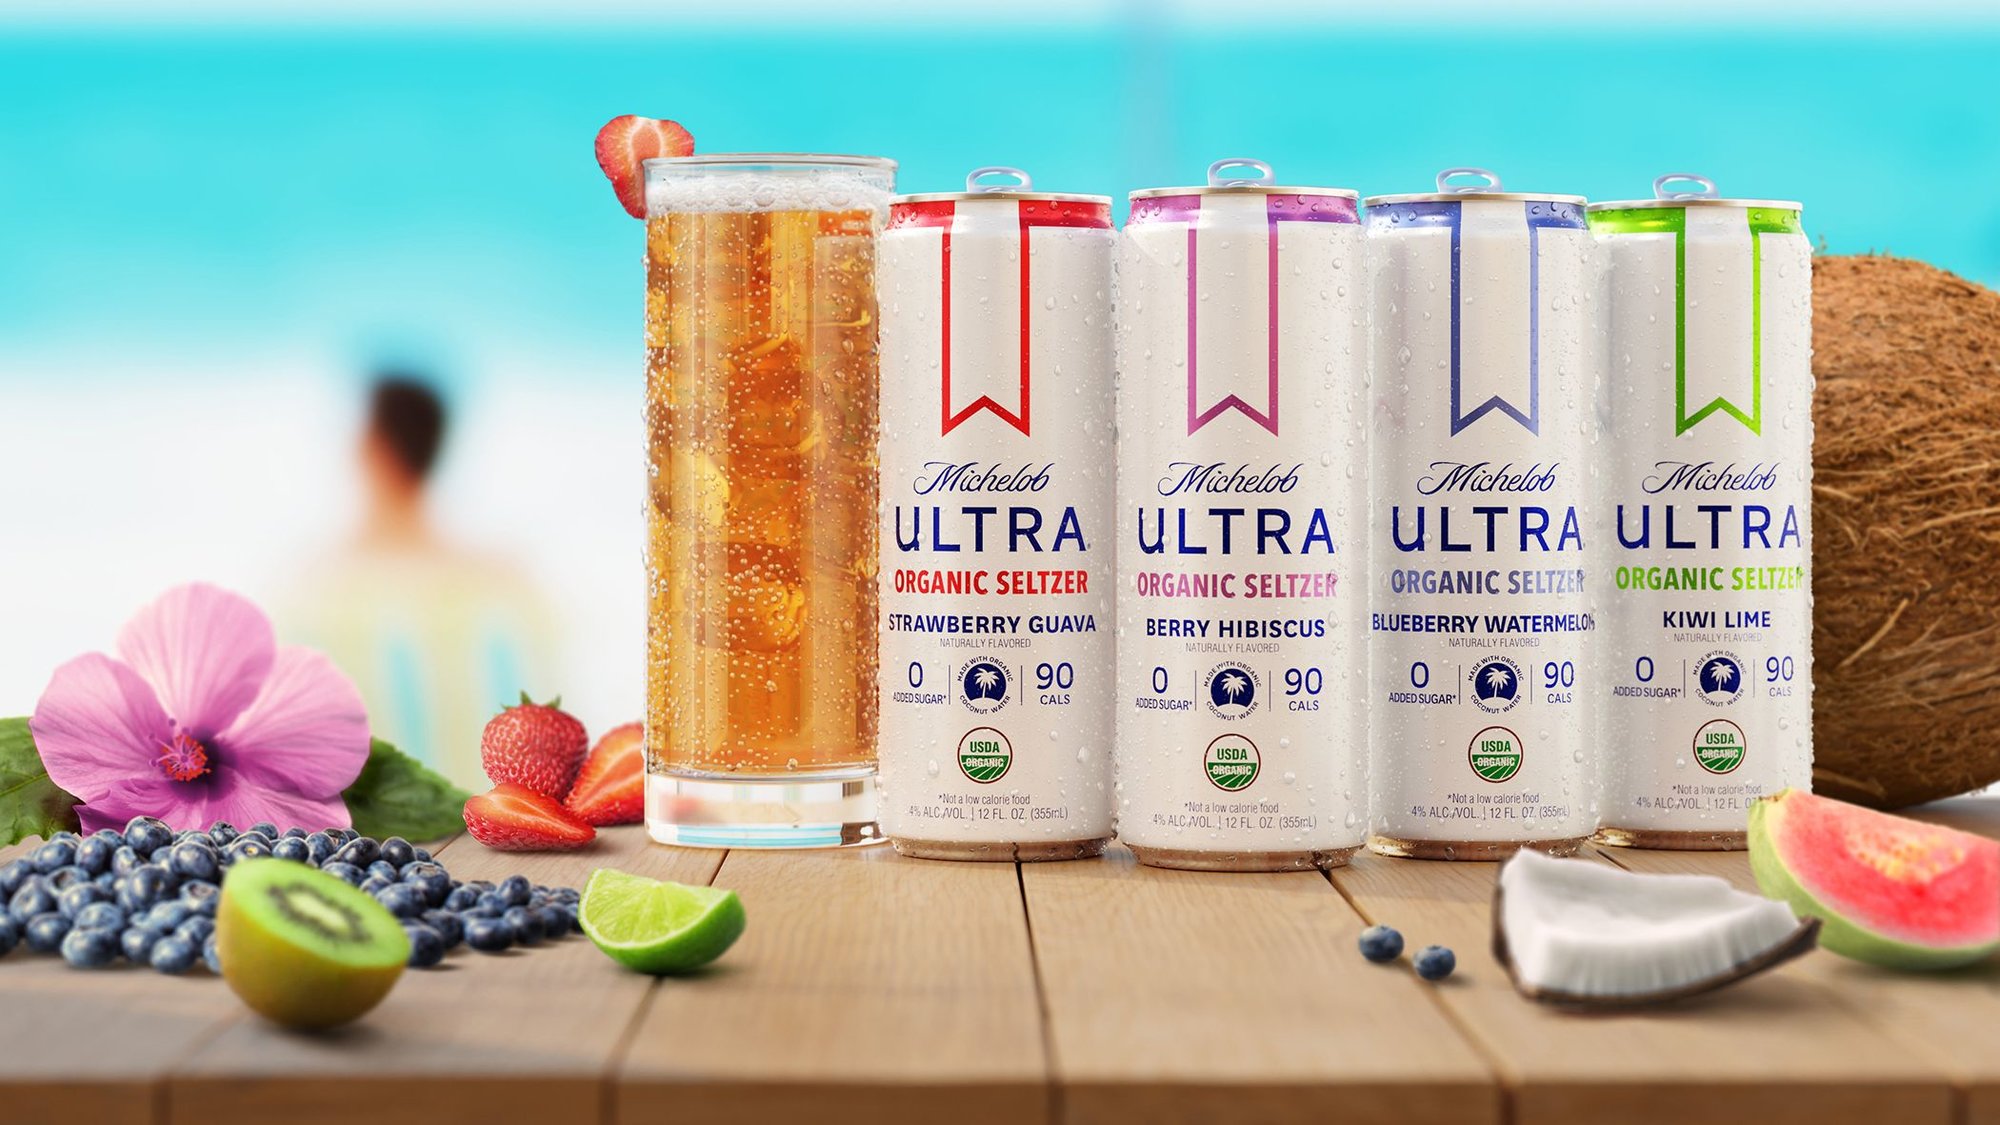 This is the main background for the Michelob Ultra Organic Seltzer Strawberry Guava